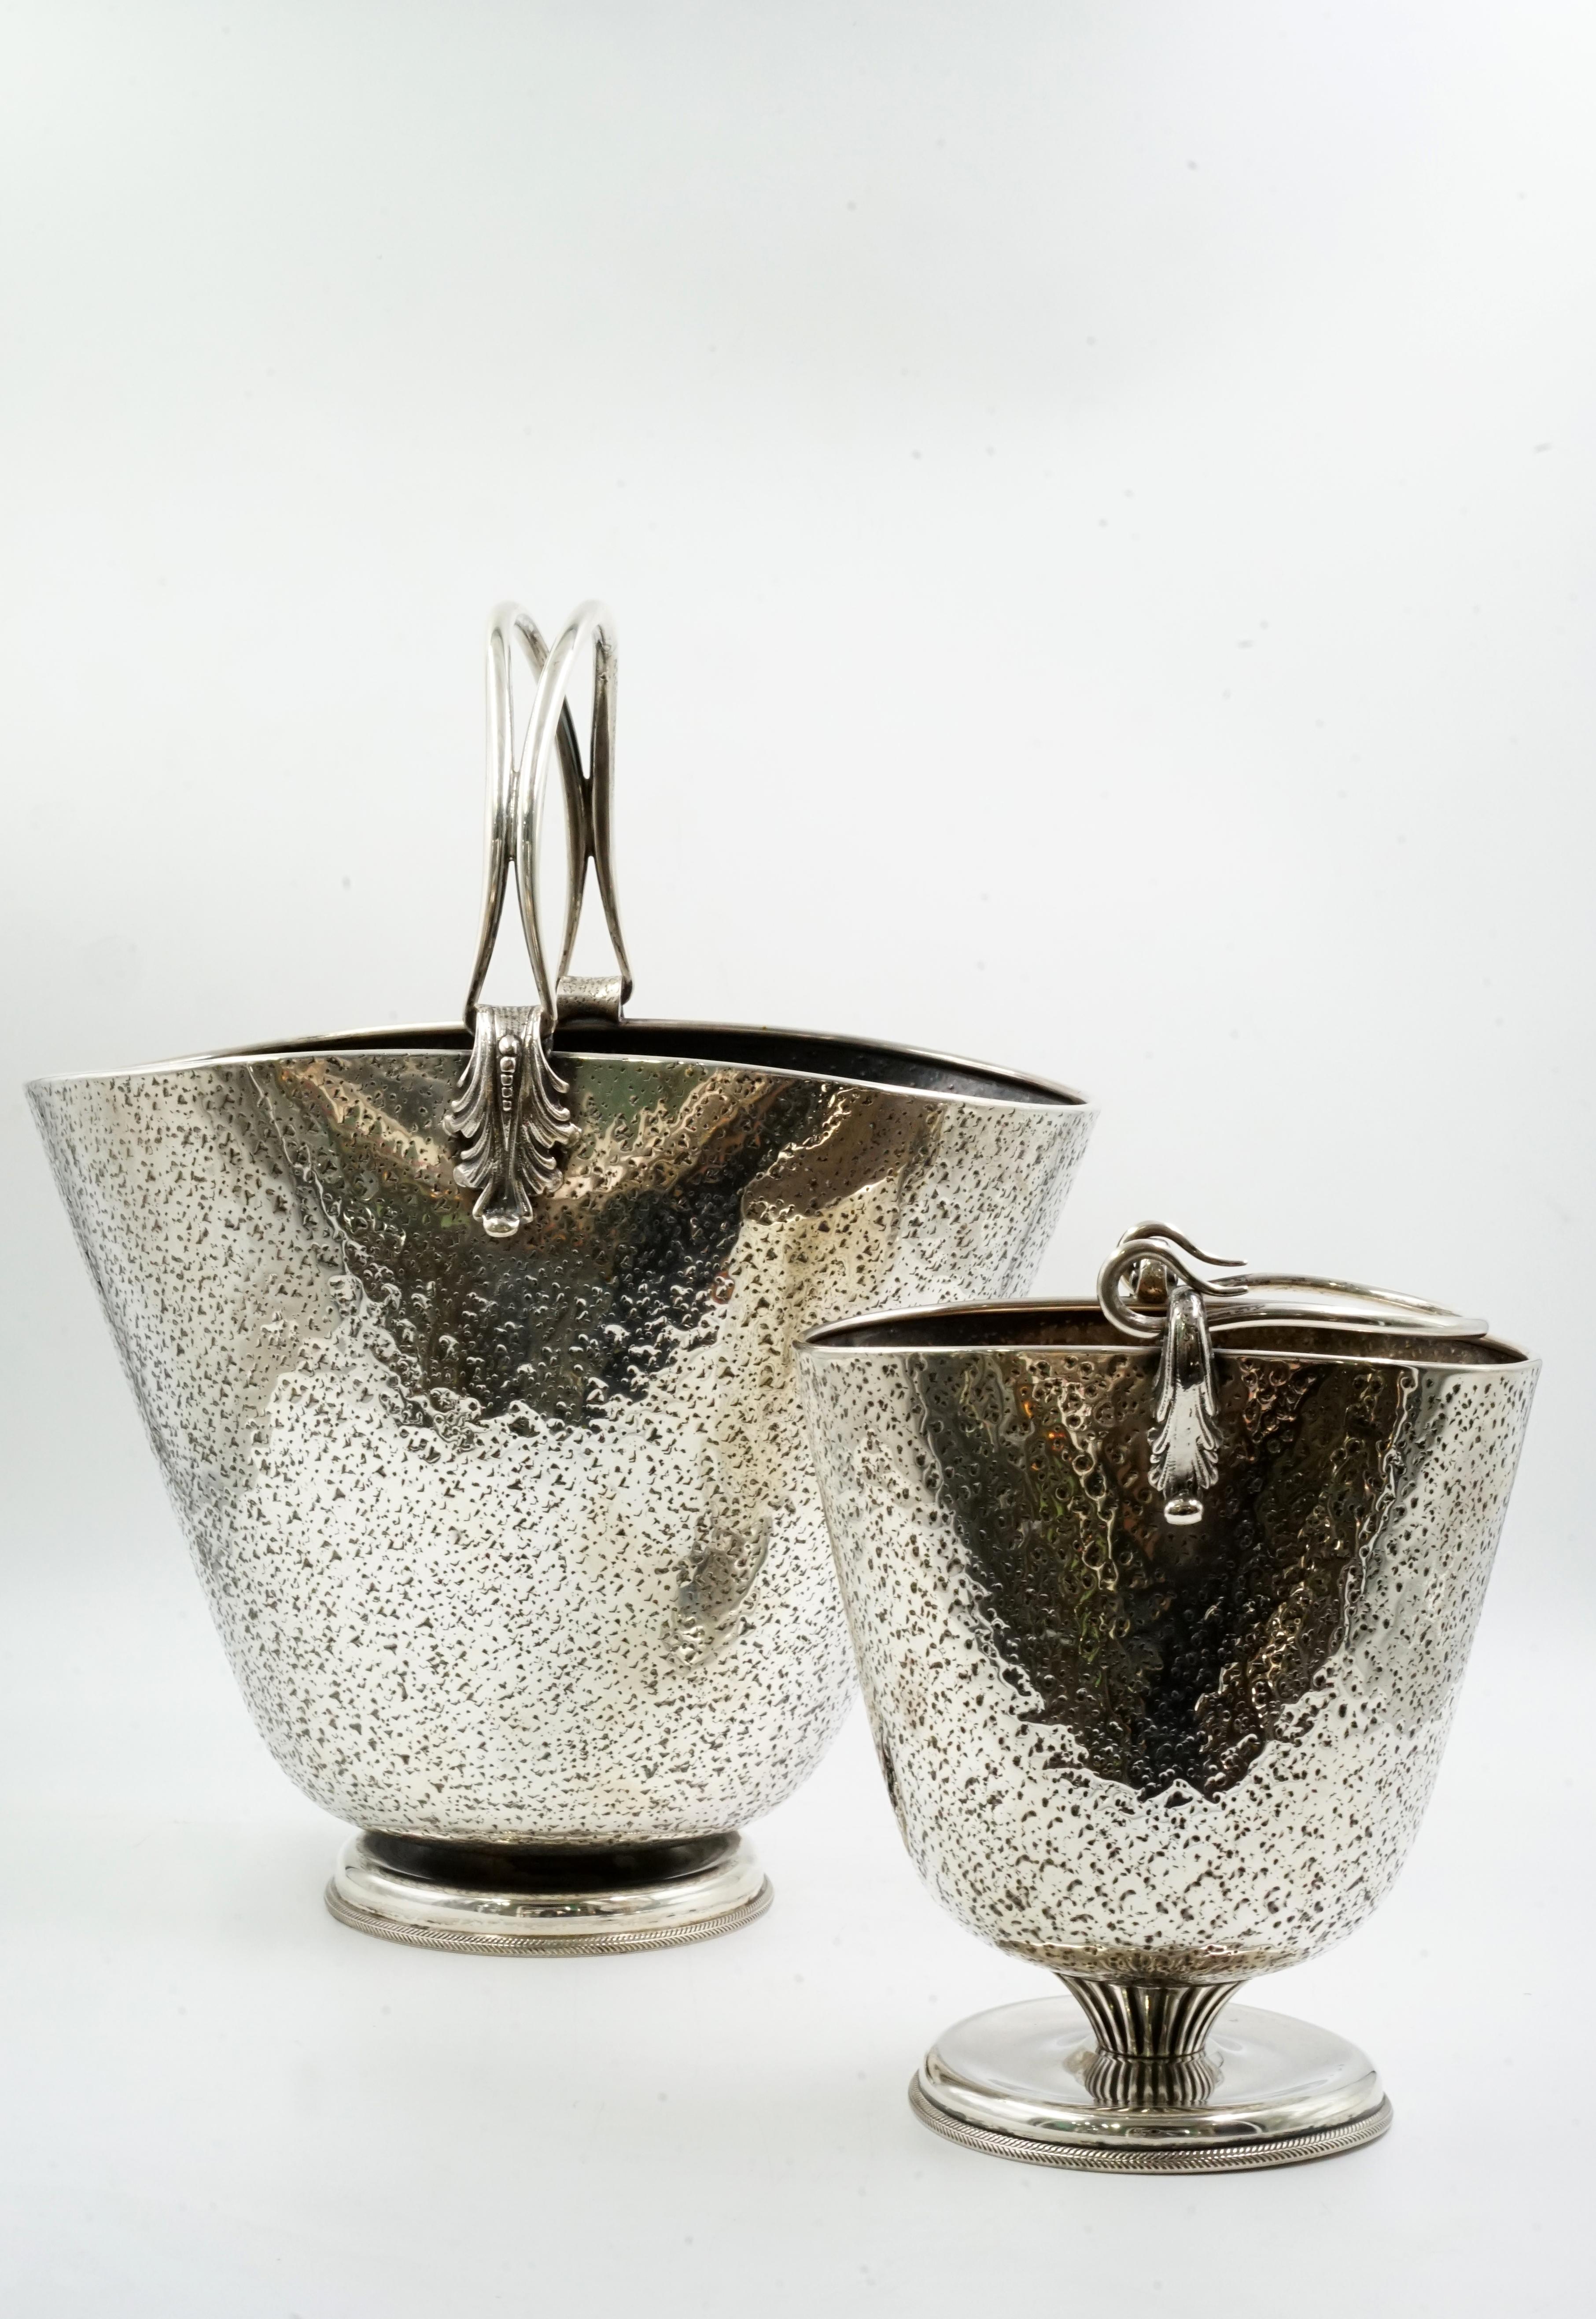 solid silver wine cooler and ice bucket mid century Italian double wine cooler Mid century styleirca 1960
Origin Italy
Solid 800 silver punch also has the manufacturer's stamp
Perfect condition - natural wear and tear from use
Without restoration